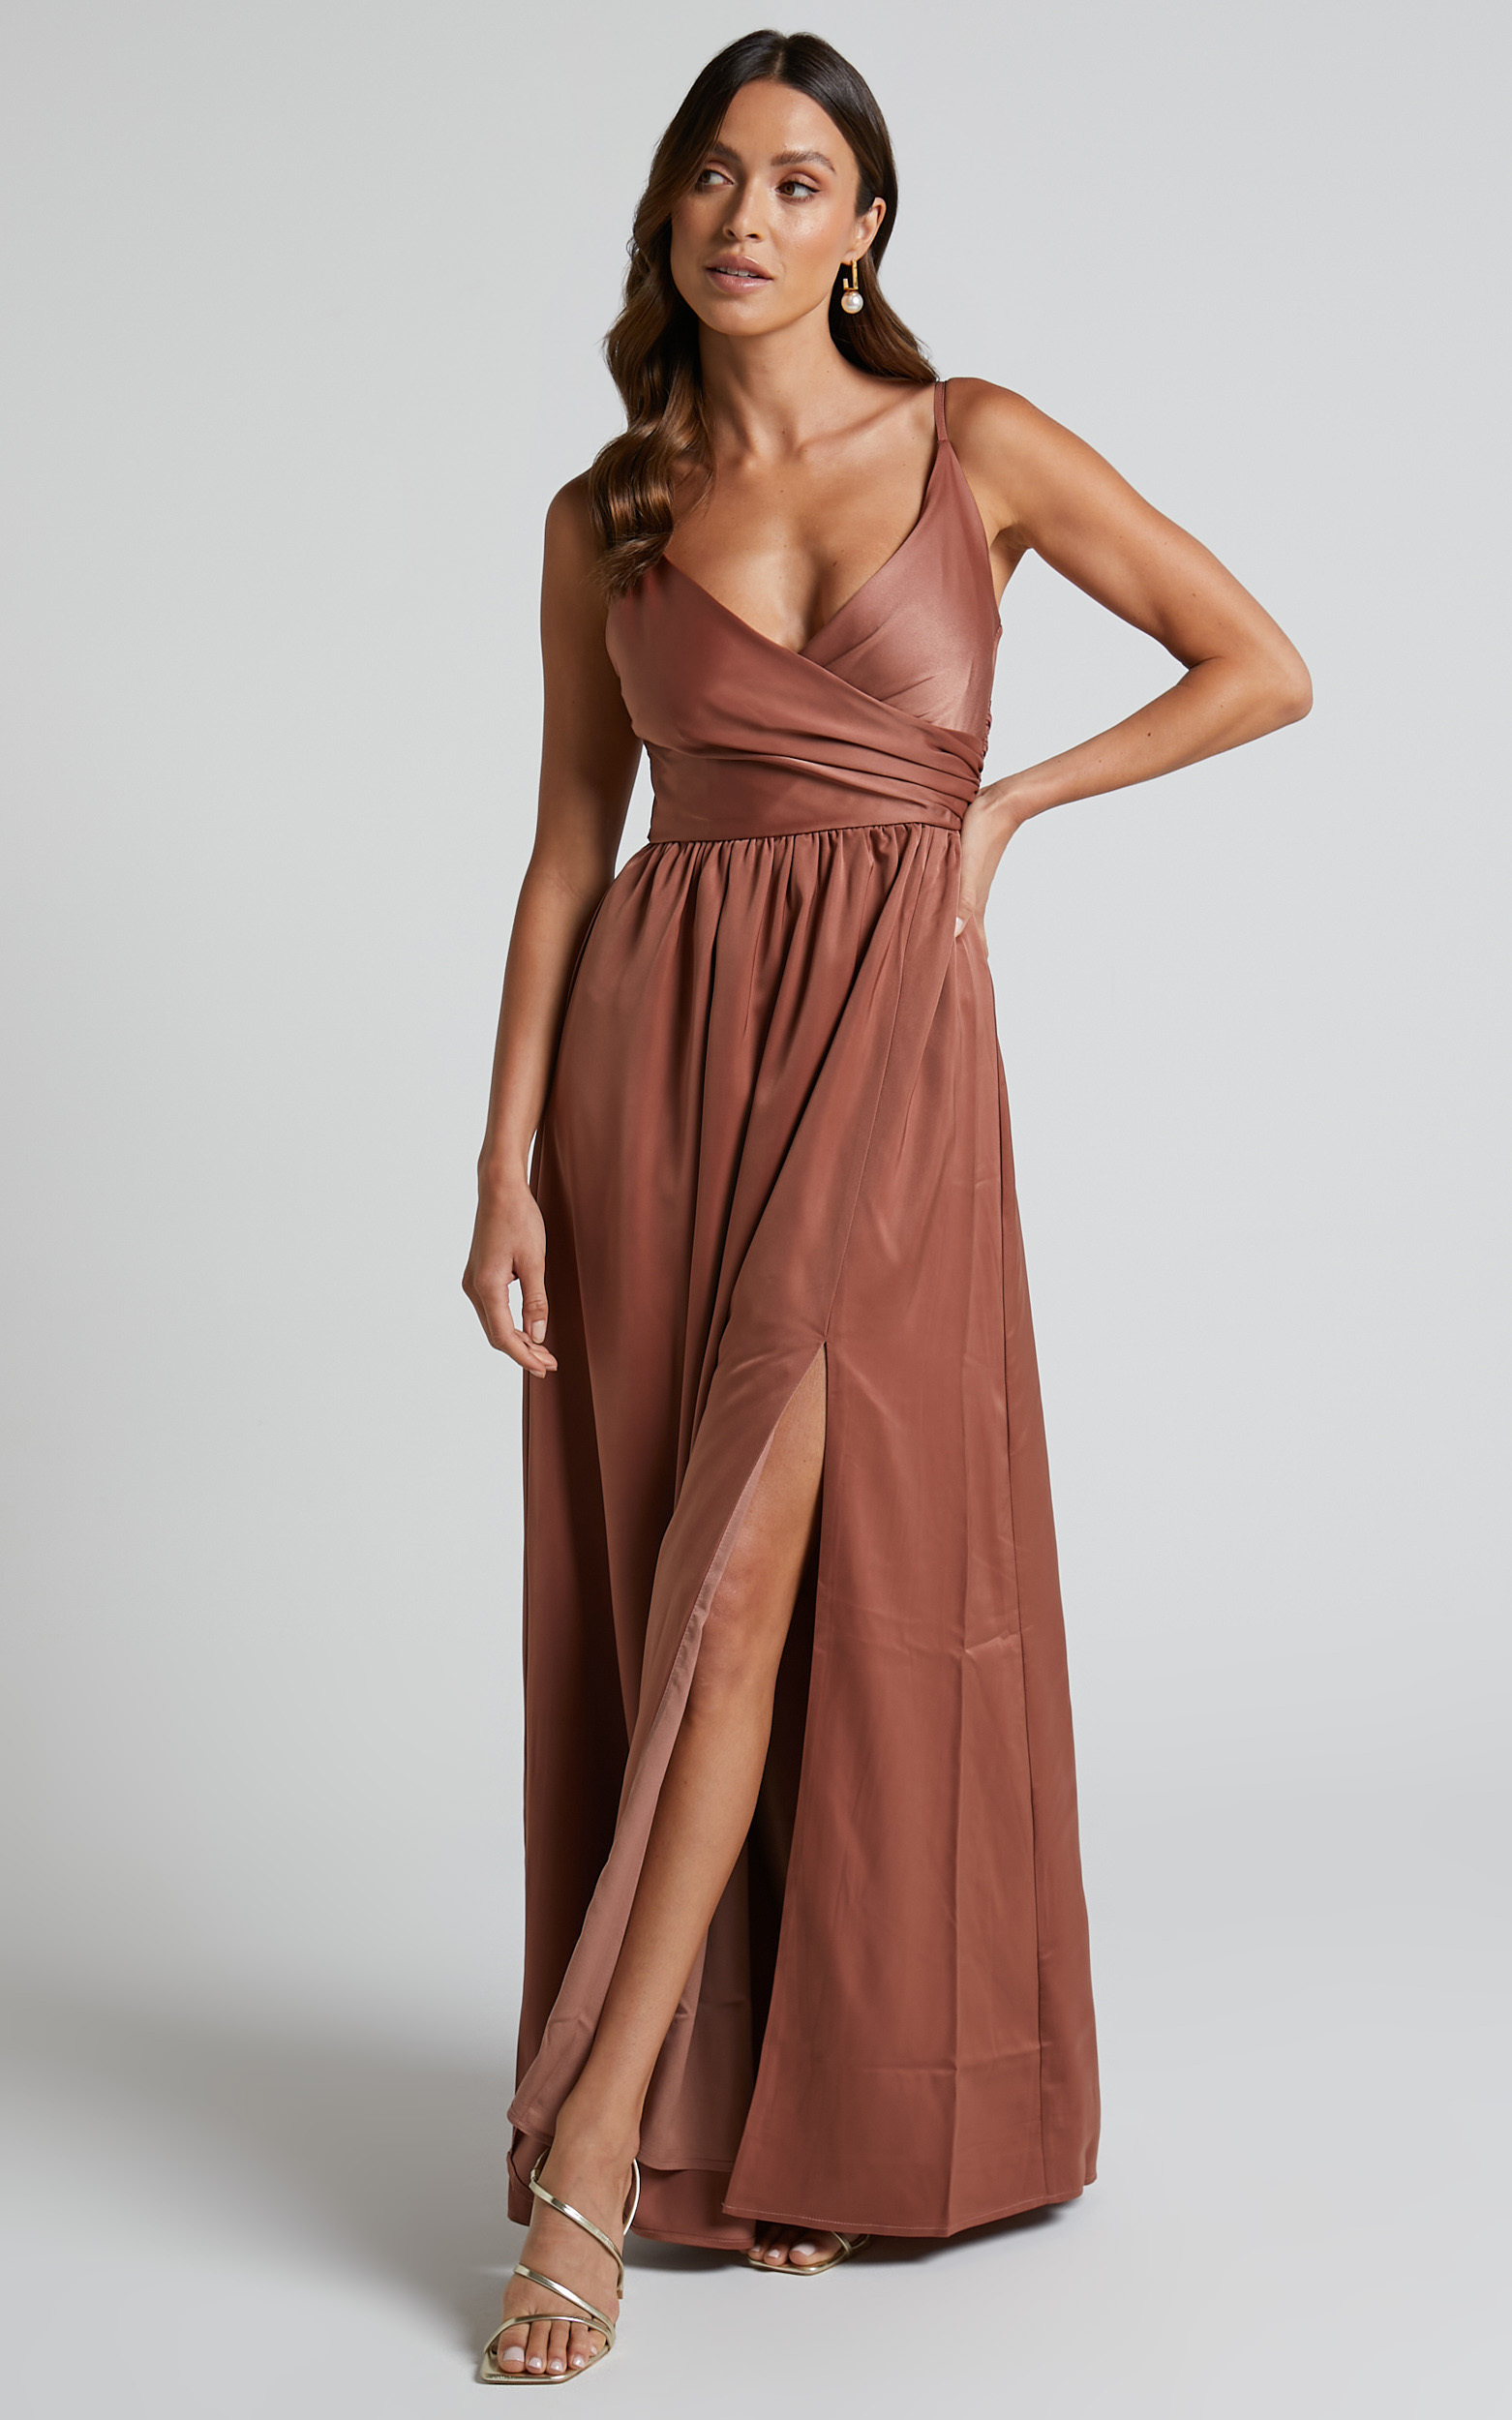 Revolve Around Me Dress in Dusty Rose - 16, PNK2, hi-res image number null